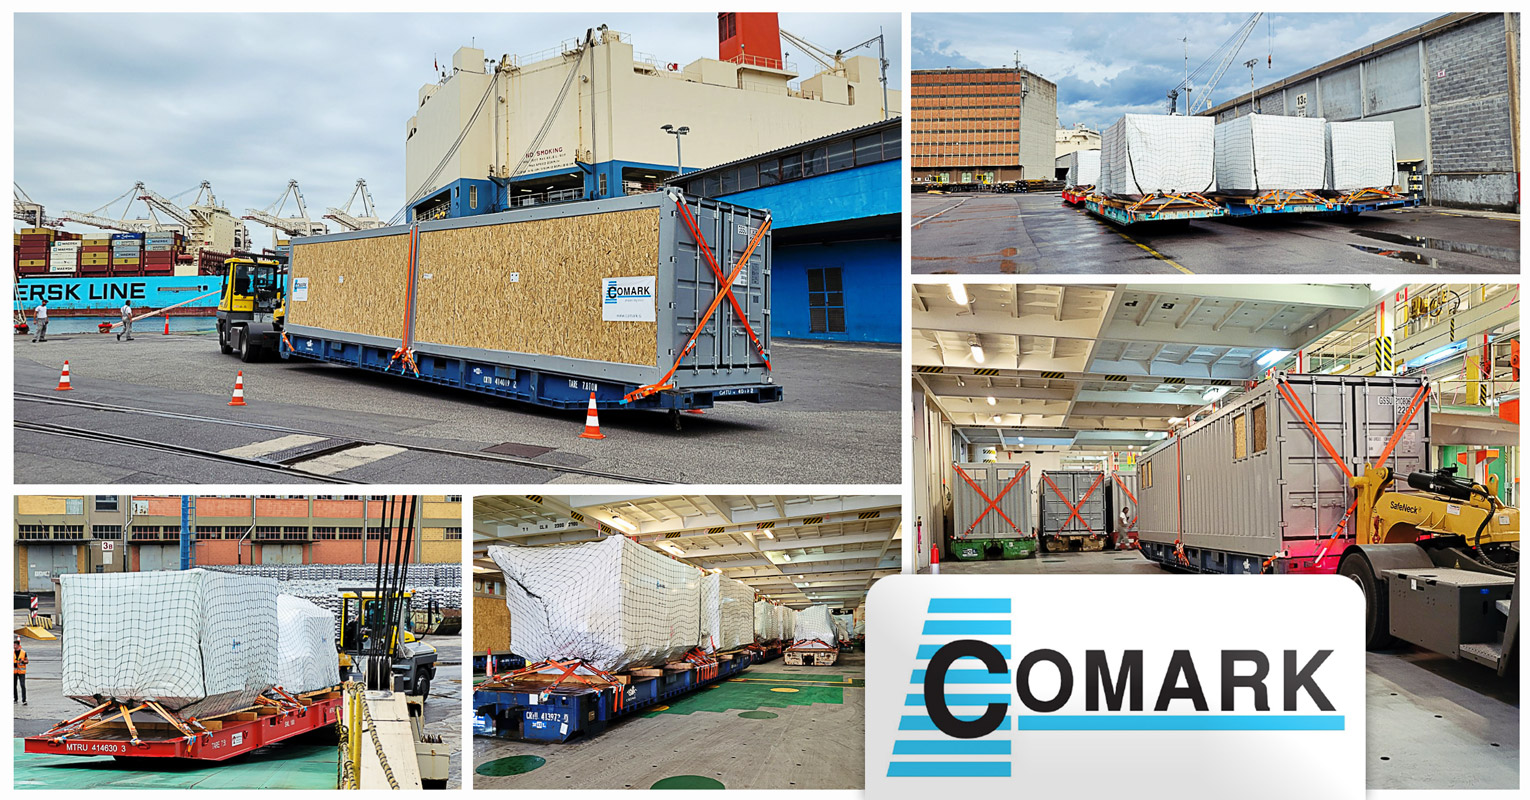 Comark Handled 19 x 40' by Rolltrailers from Port of Koper for Vietnam & China